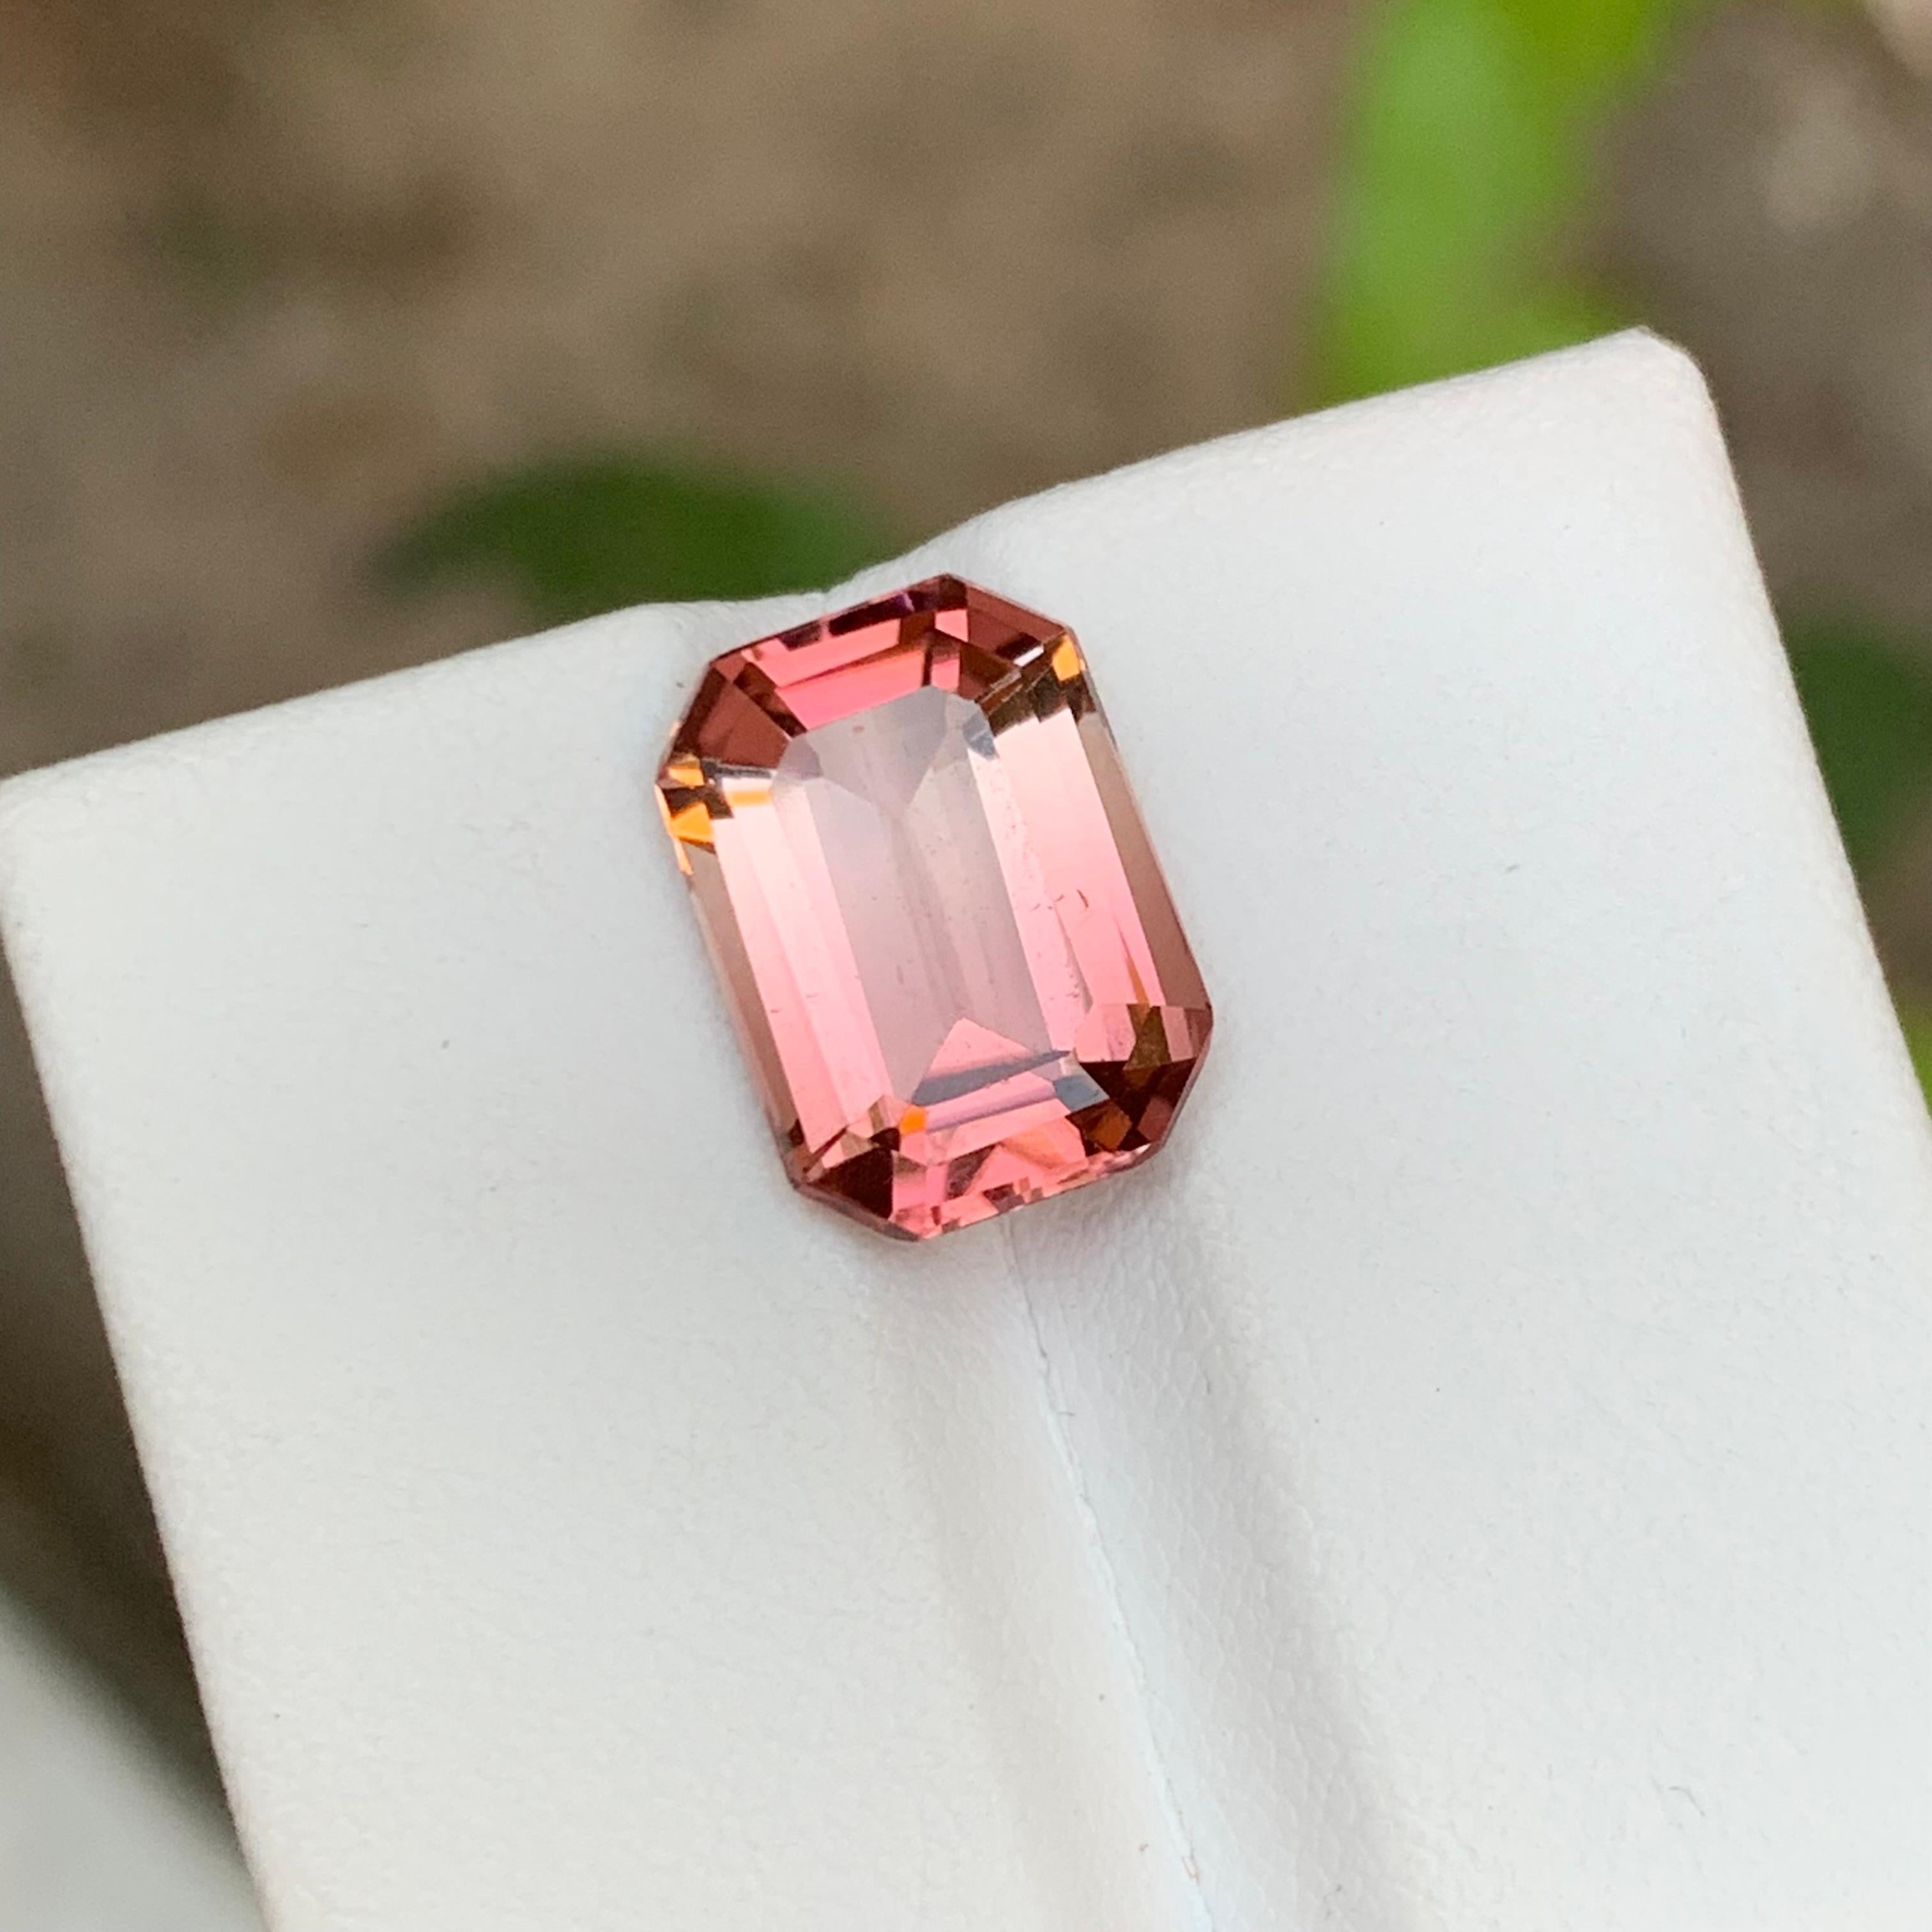 Rare Peachy Pink Bicolor Natural Tourmaline Gemstone, 4.80 Ct Emerald Cut-Ring  For Sale 7